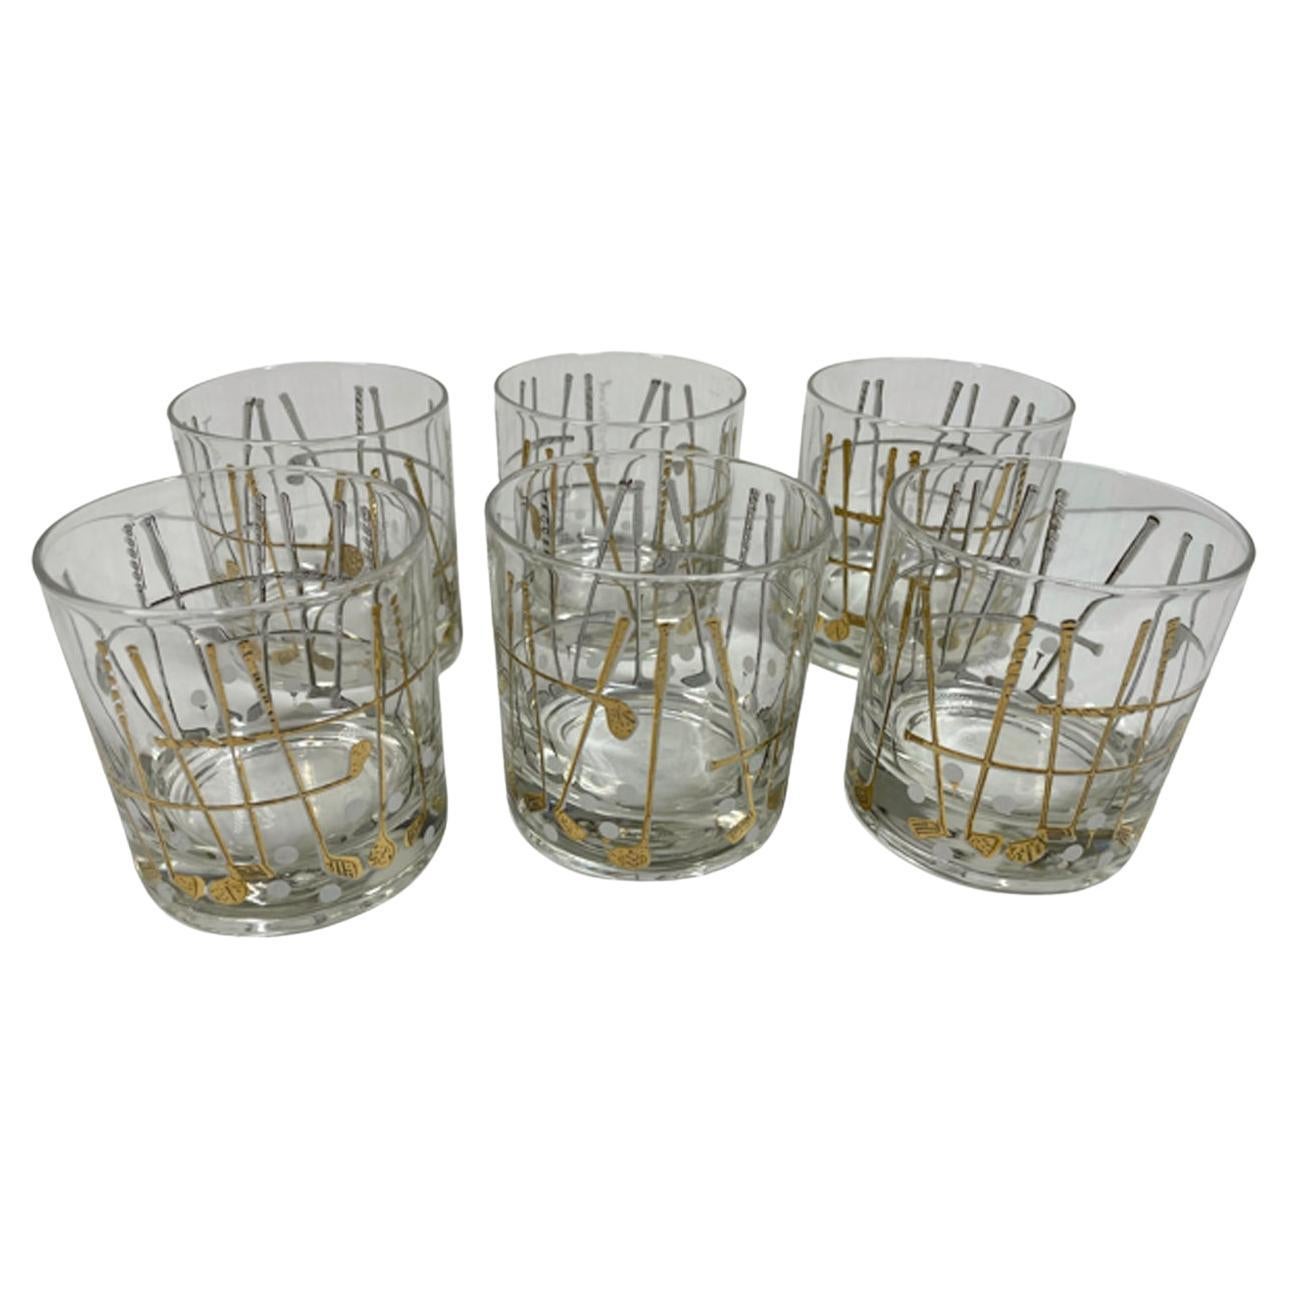 Six Georges Briard Designed Rocks Glasses in the "Golf" Pattern  For Sale